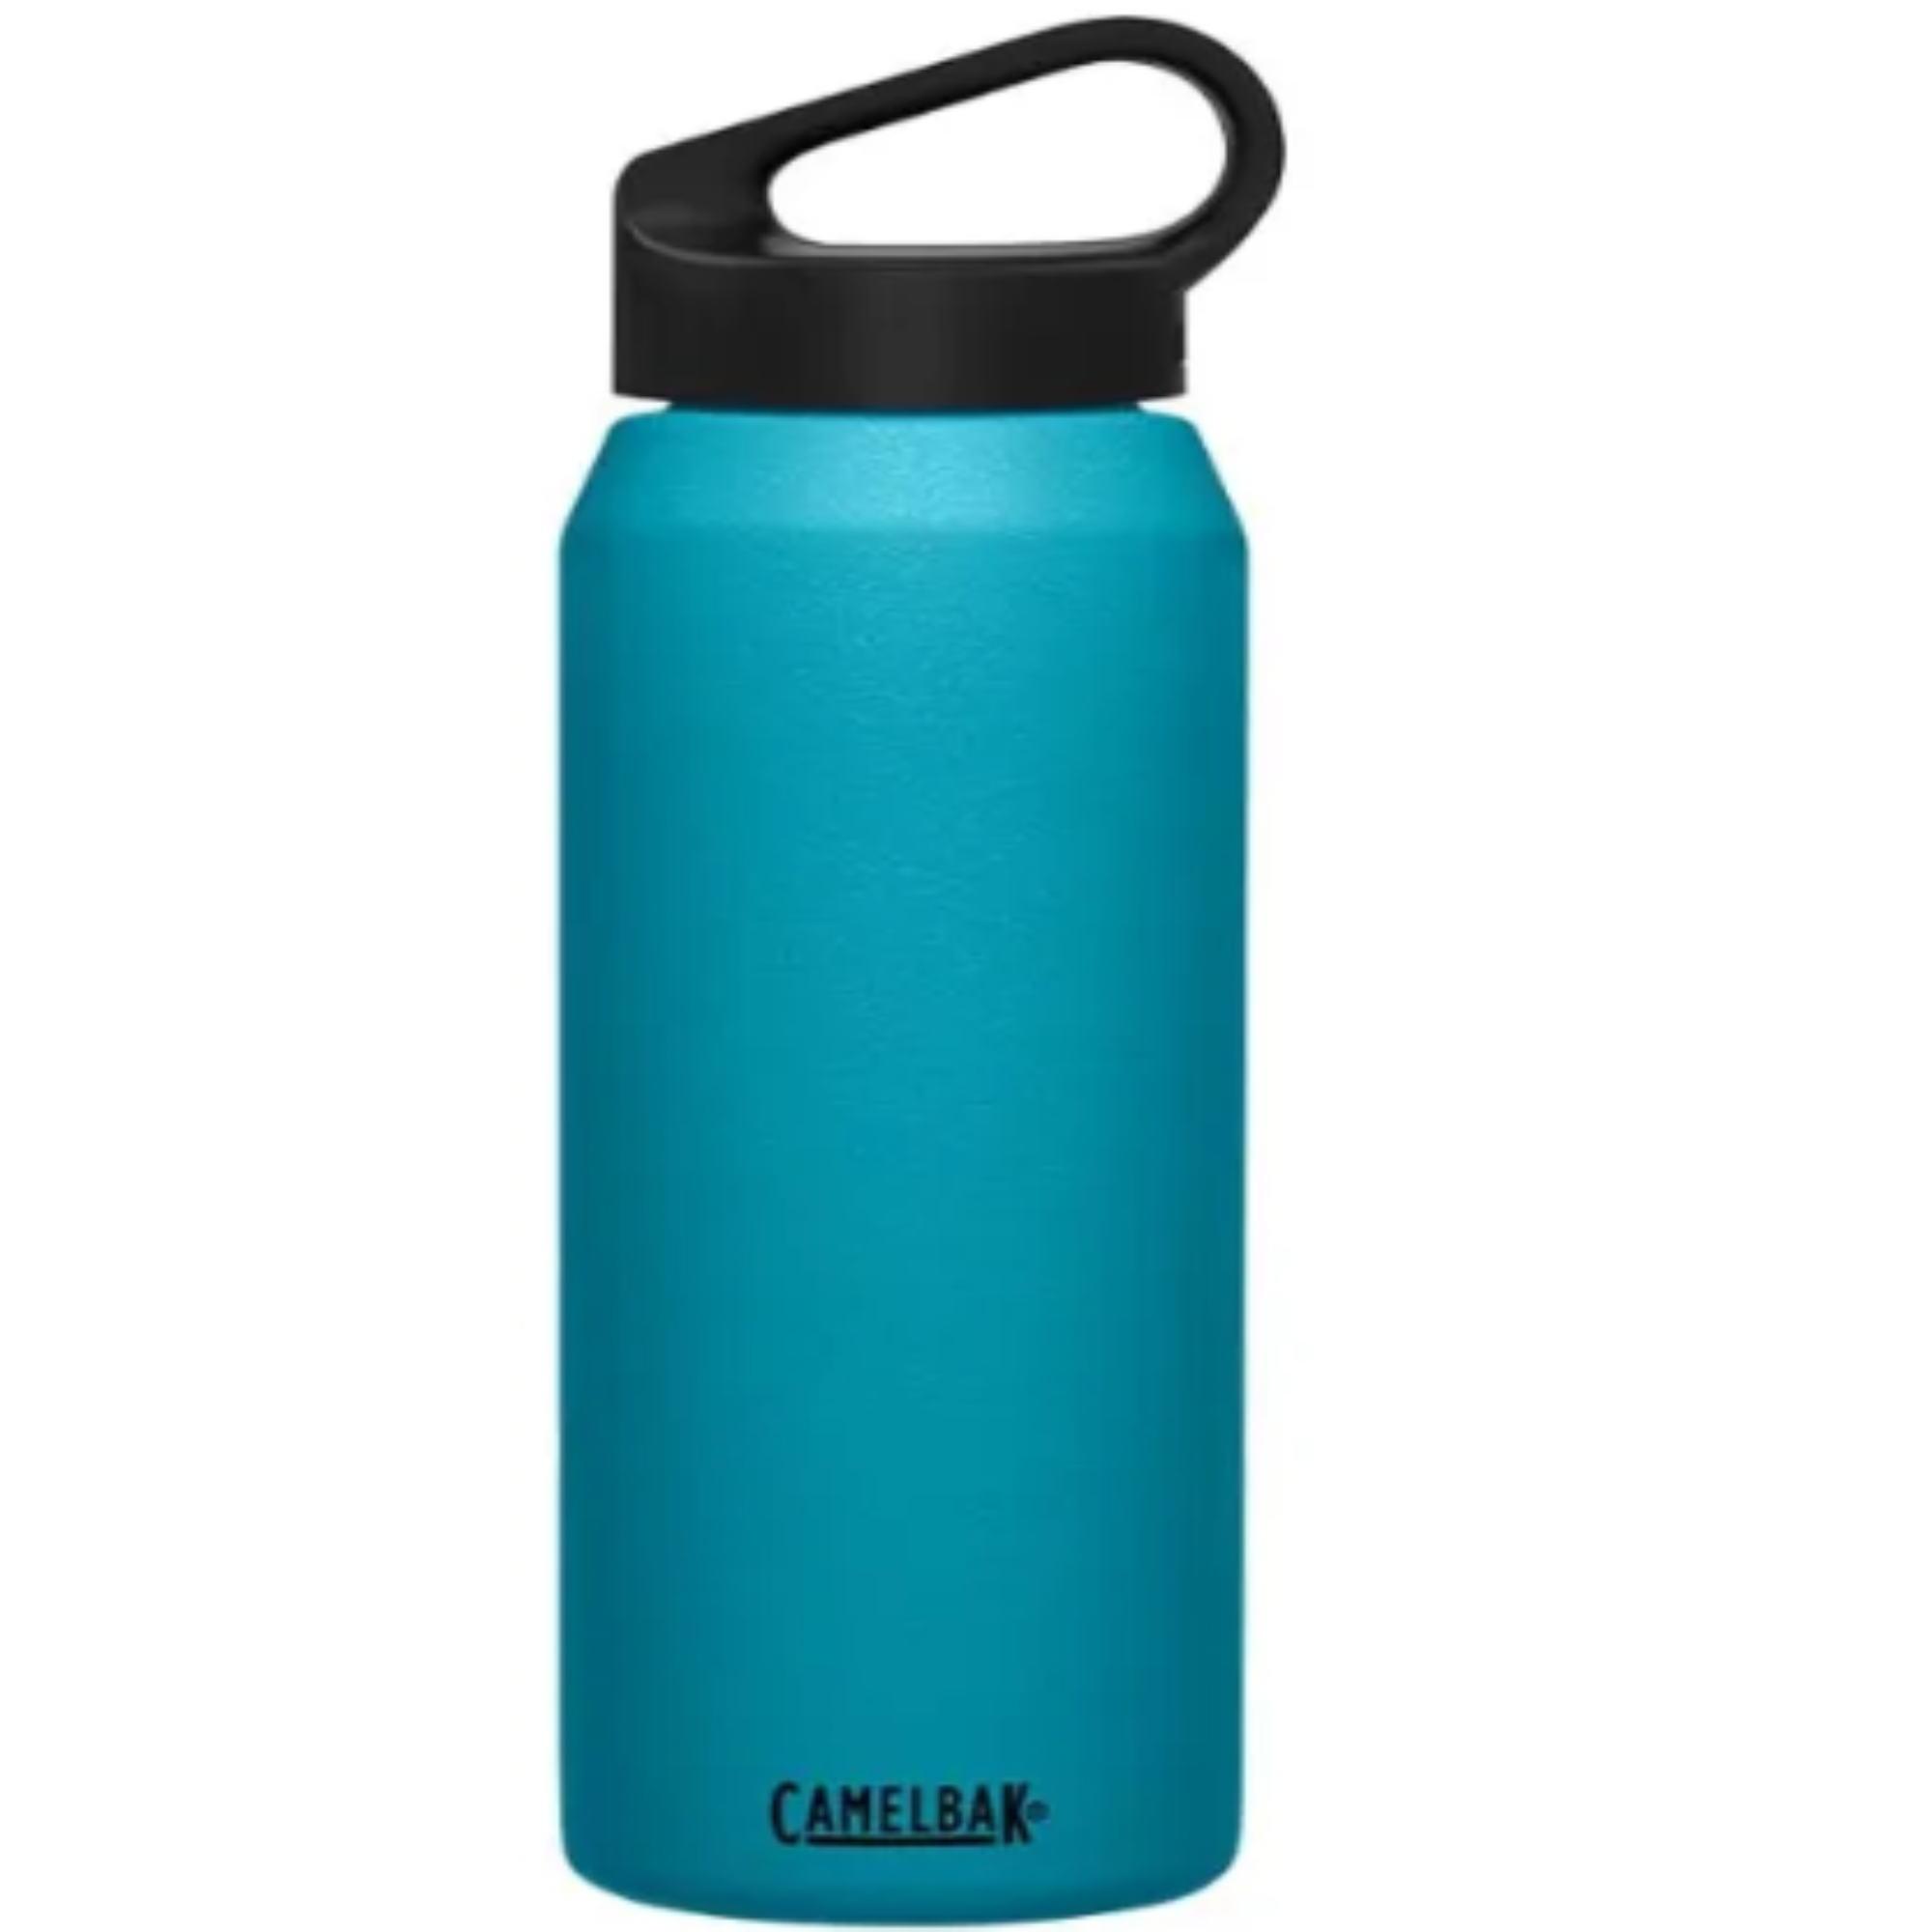 CAMELBAK VACUUM INSULATED Stainless Steel Carry Cap Water Bottle 1L